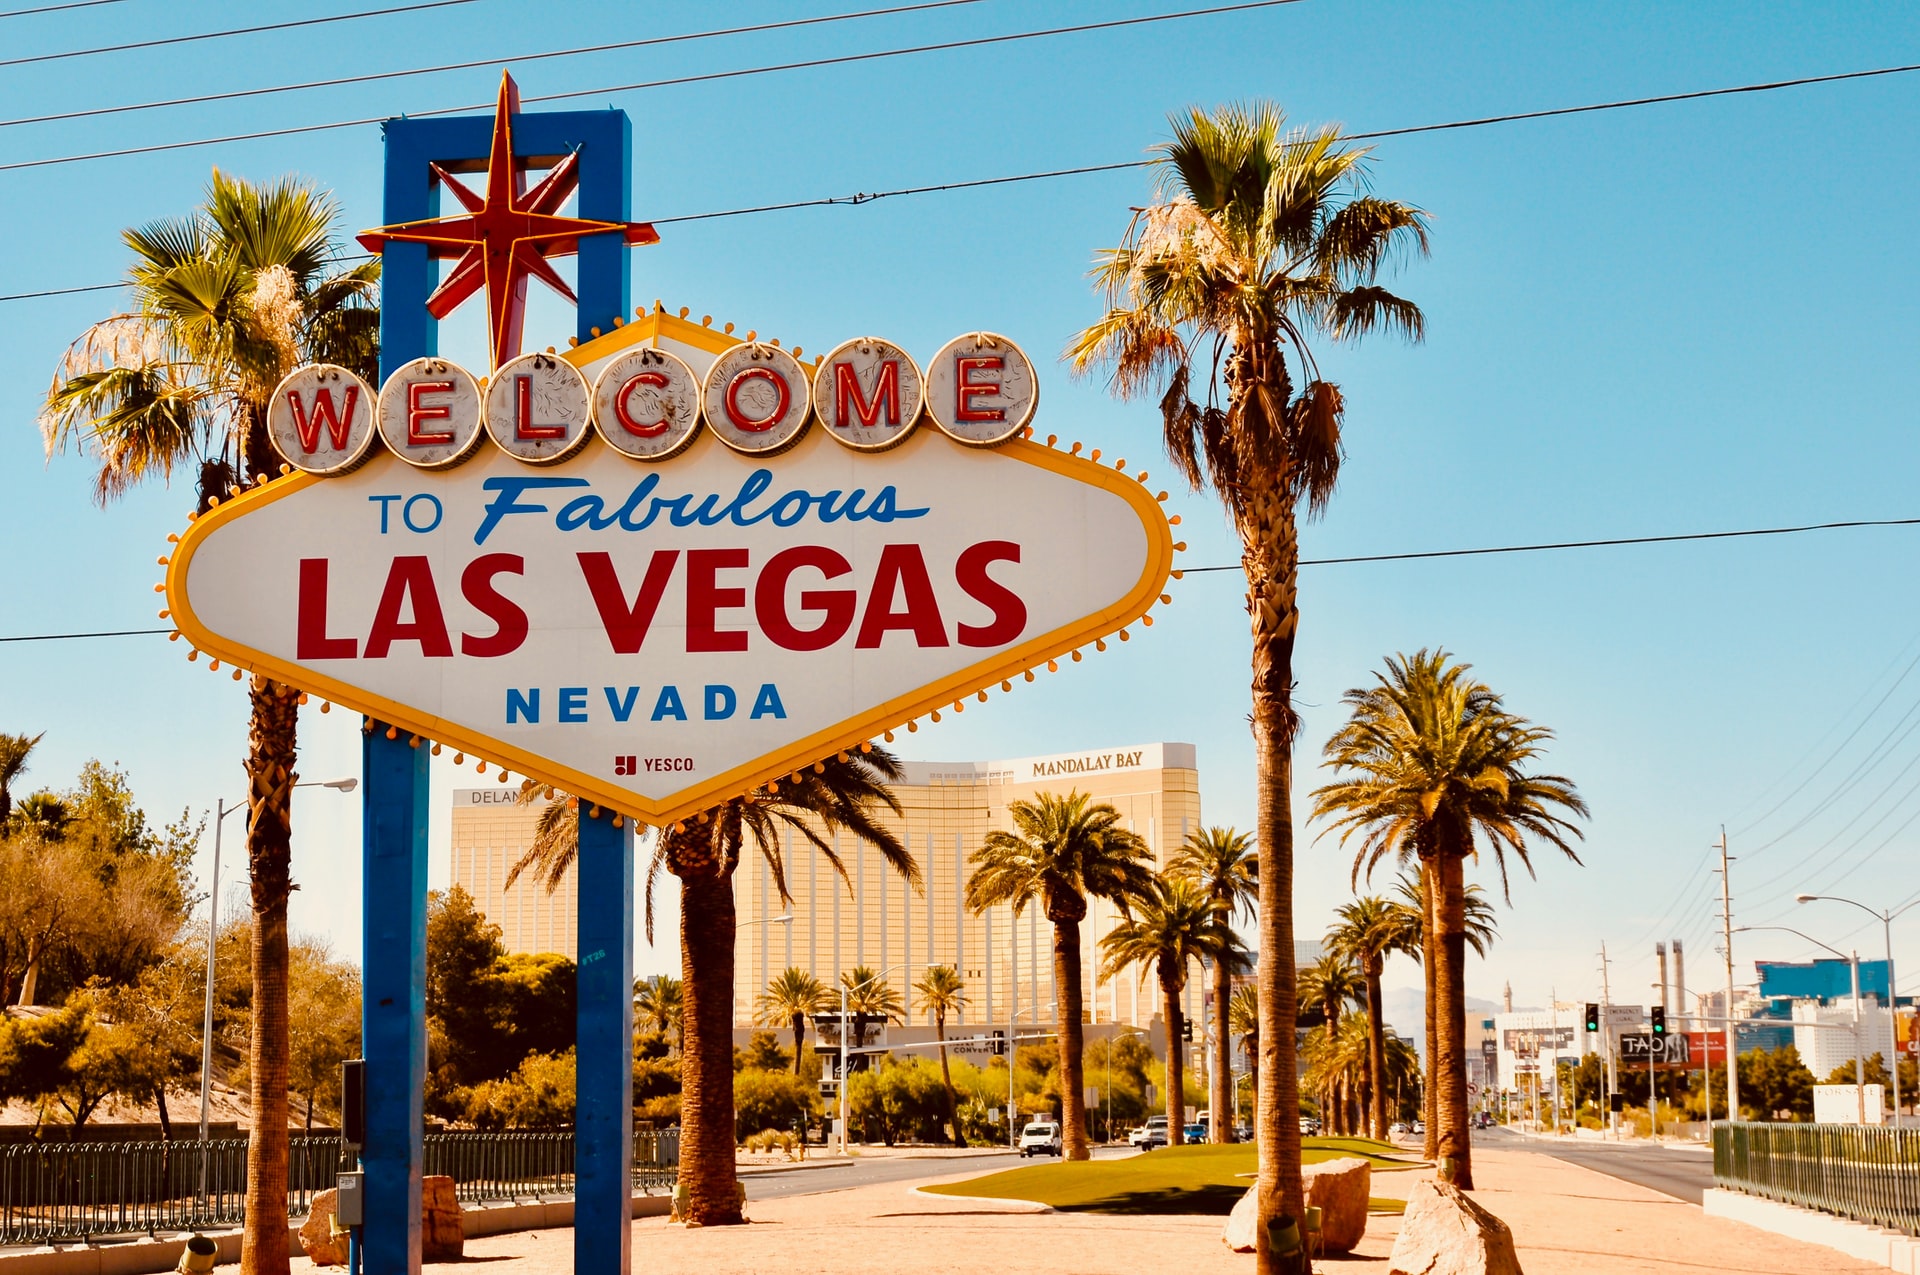 Welcome to Las Vegas sign (photo: Grant Cai)